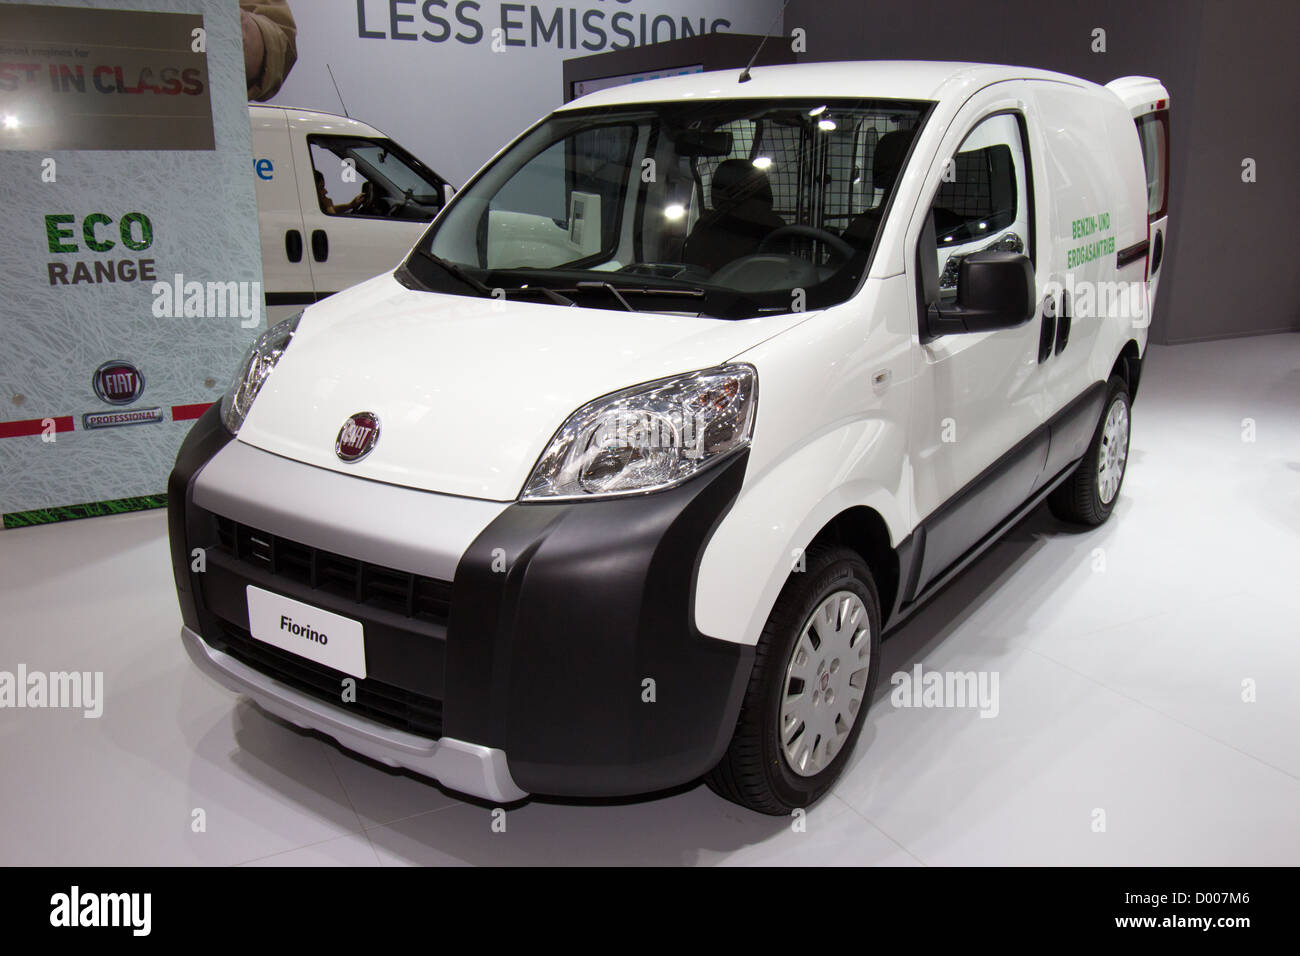 Fiat Fiorino at the International for Commercial Vehicles in